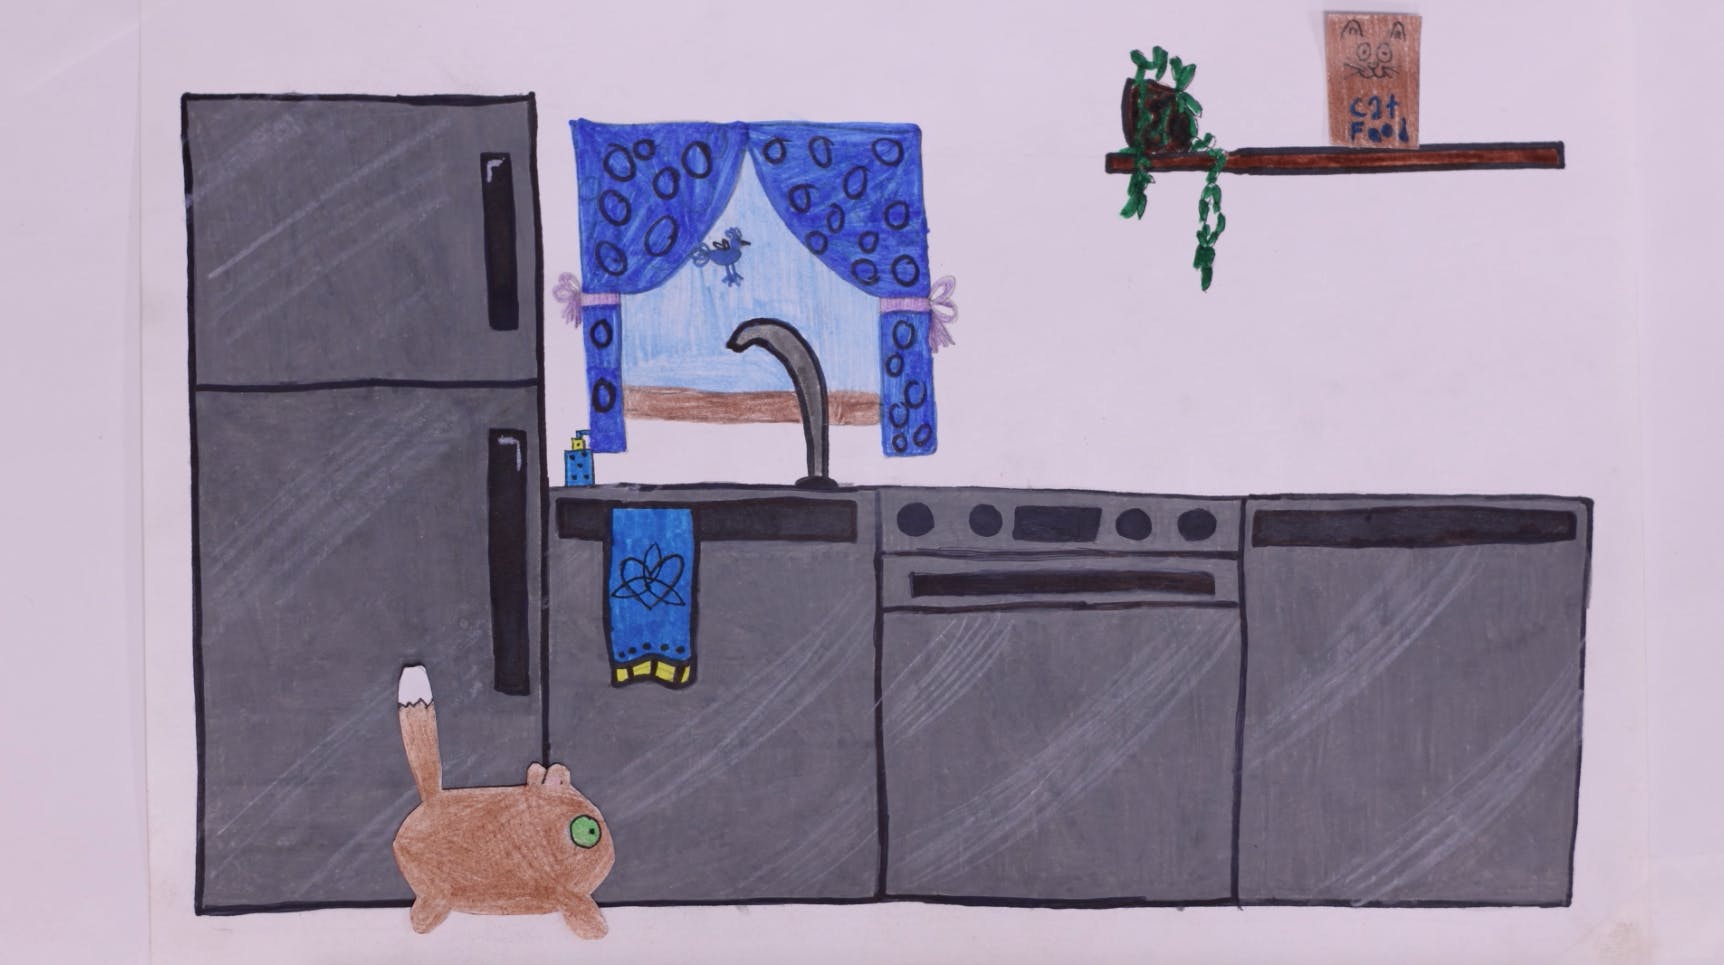 Image of a cut out animation of a kitchen and a cat running in front of the fridge